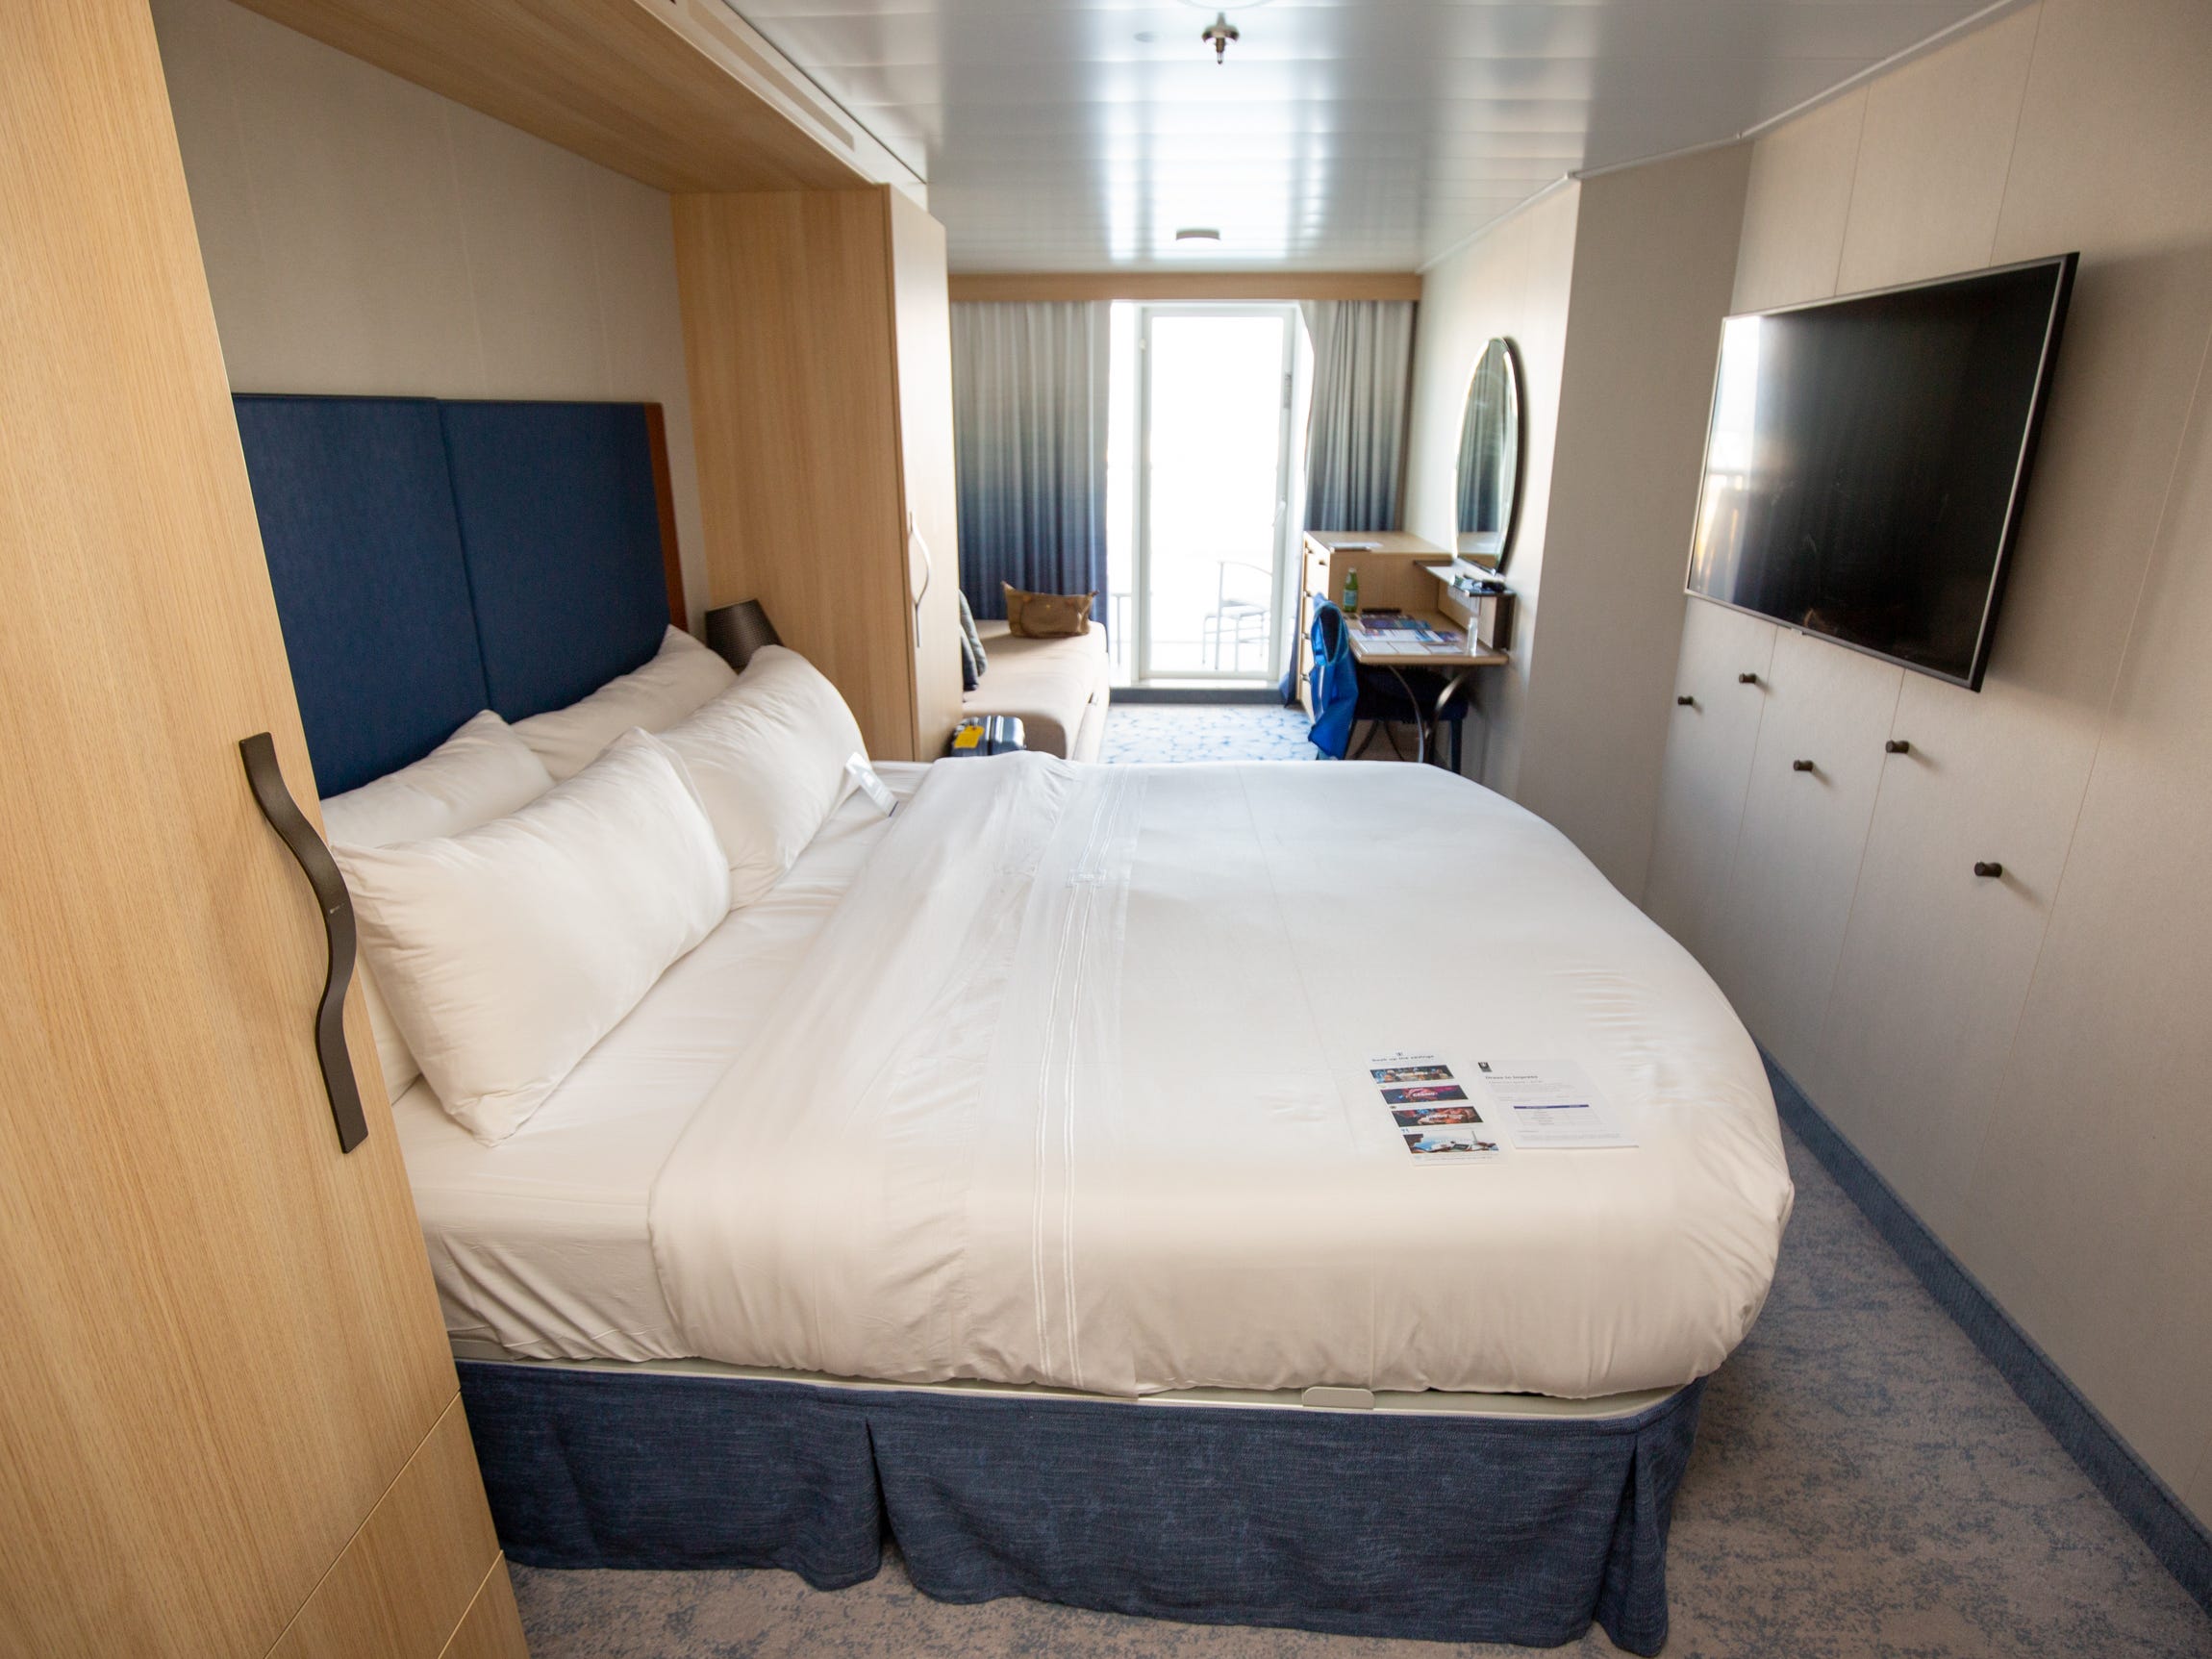 <p>Icon's cheapest balcony cabins are currently $900 more than the most affordable ones on Wonder — an almost $130 per person and day difference.</p><p>Based on the quality of the staterooms alone, if you prioritize functionality, comfort, and affordability over modern decor, consider saving money and going with the <a href="https://www.businessinsider.com/review-royal-caribbean-wonder-of-the-sea-cruise-ship-photos-2023-1">two-year-old ship</a>.</p>